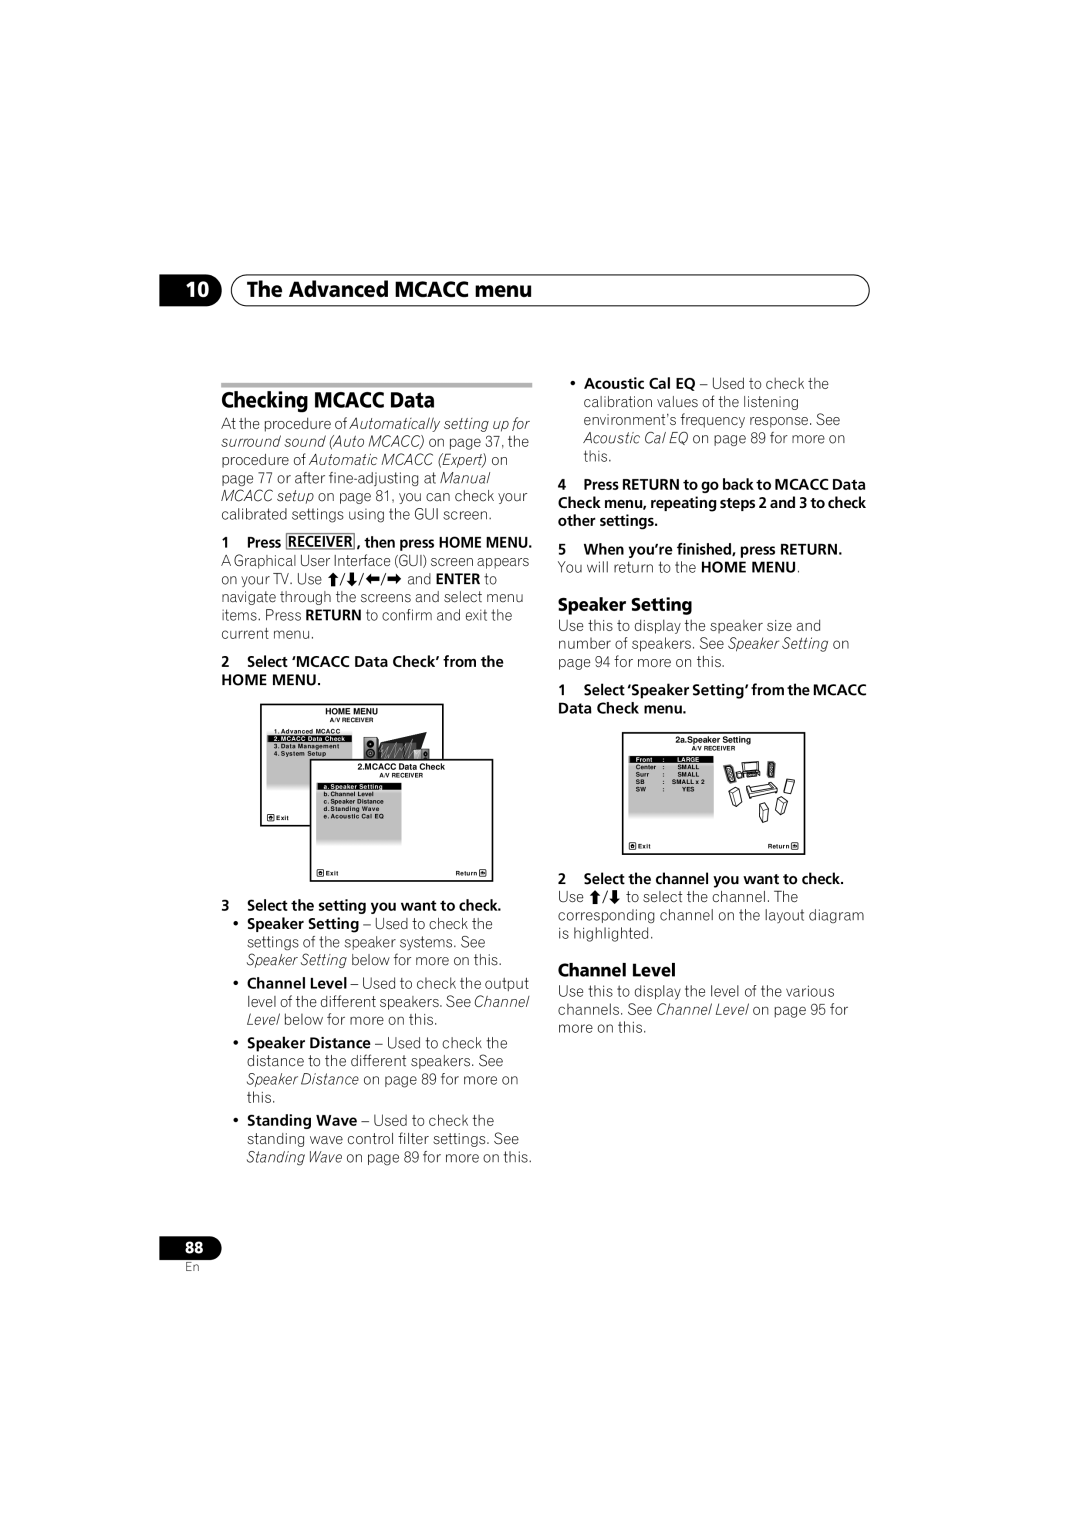 Pioneer VSX-919AH-S manual 10The Advanced MCACC menu Checking MCACC Data, Speaker Setting, Channel Level 